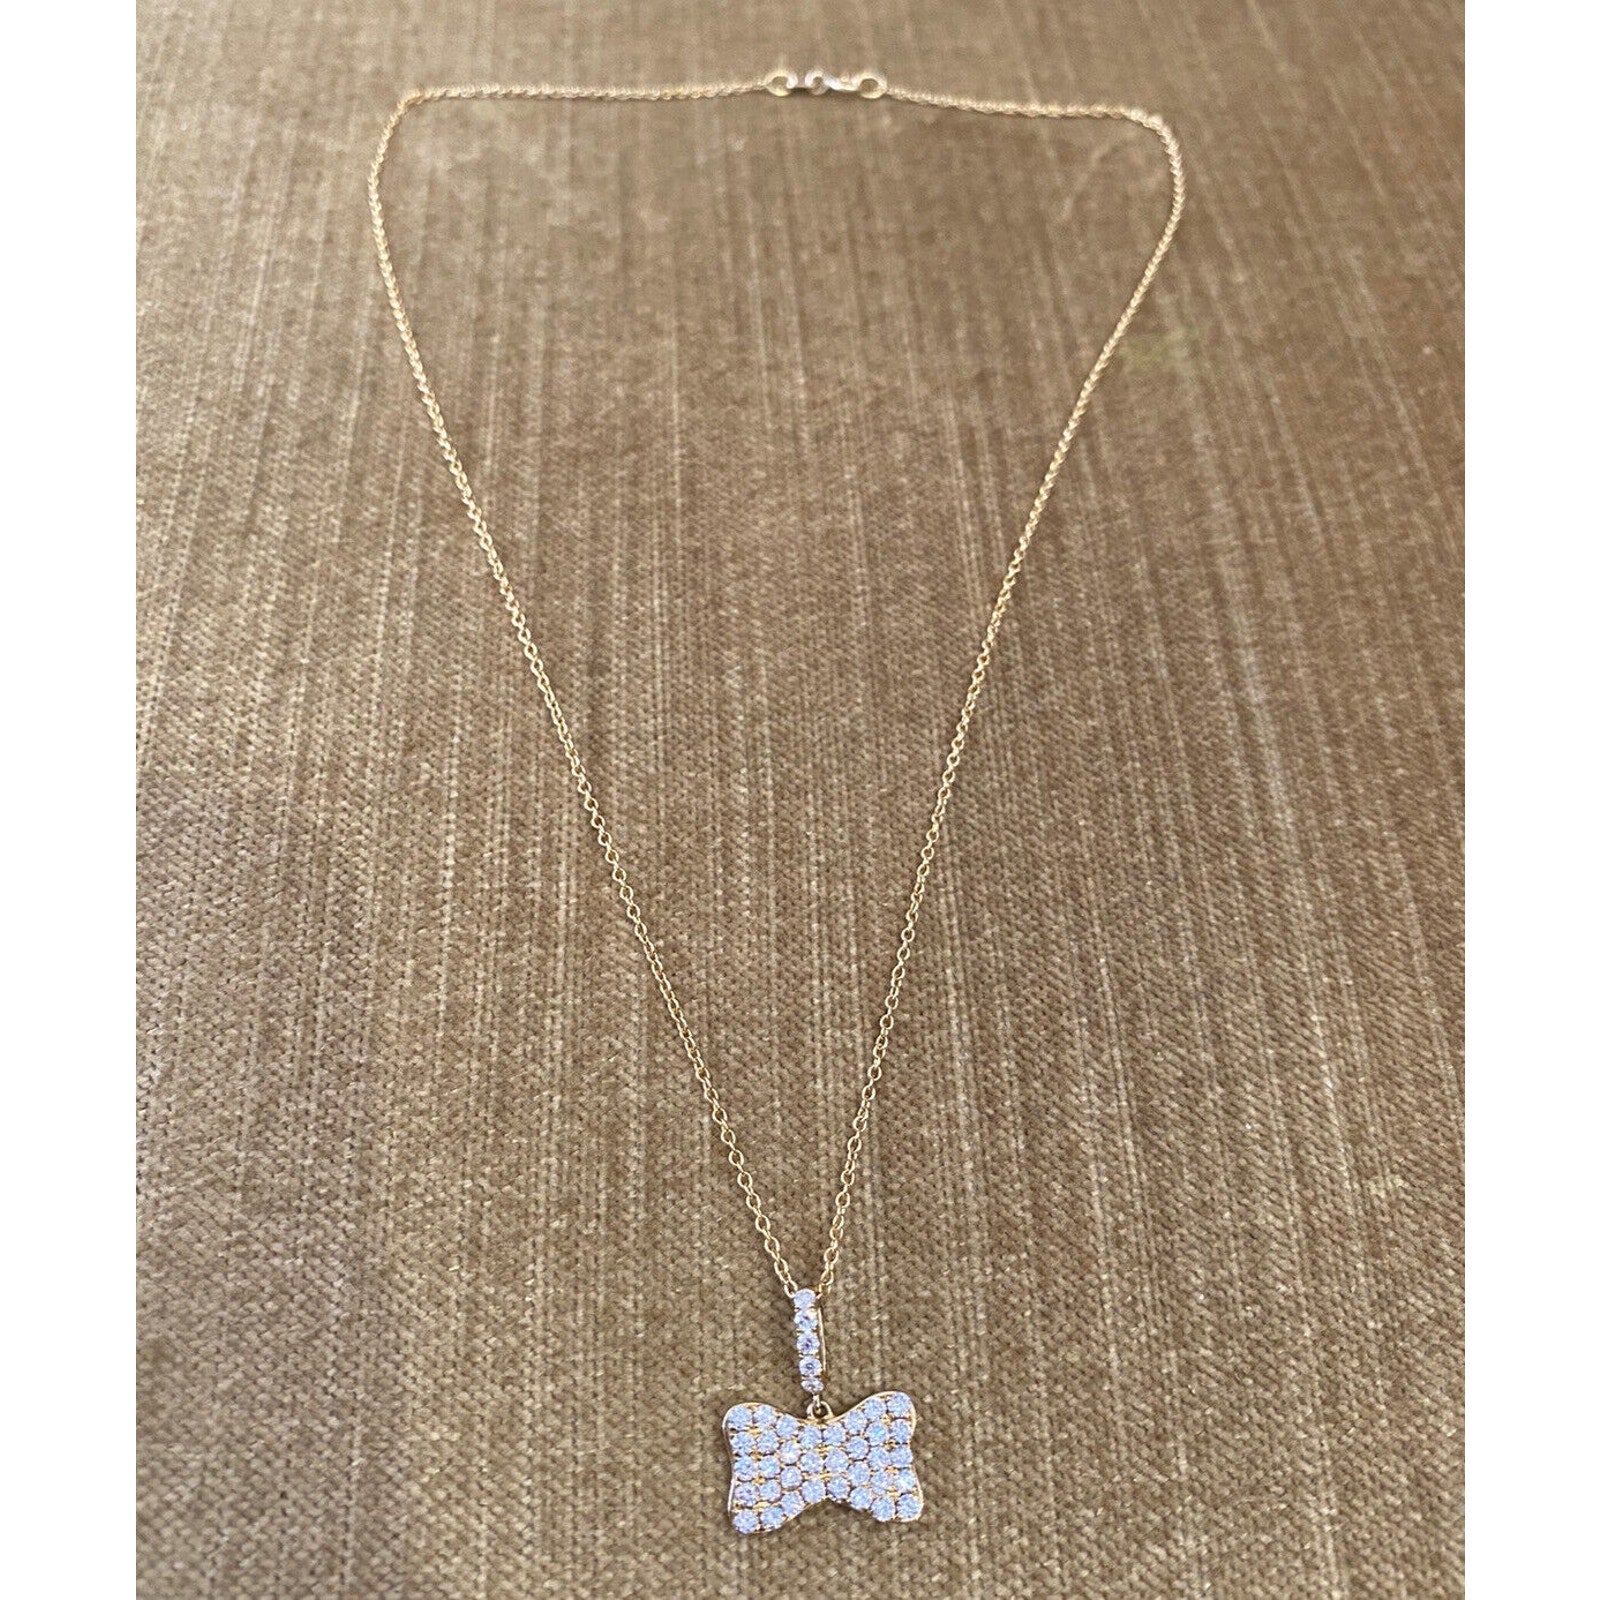 ODELIA Diamond Pave Bow Pendent Necklace in 18k Yellow Gold